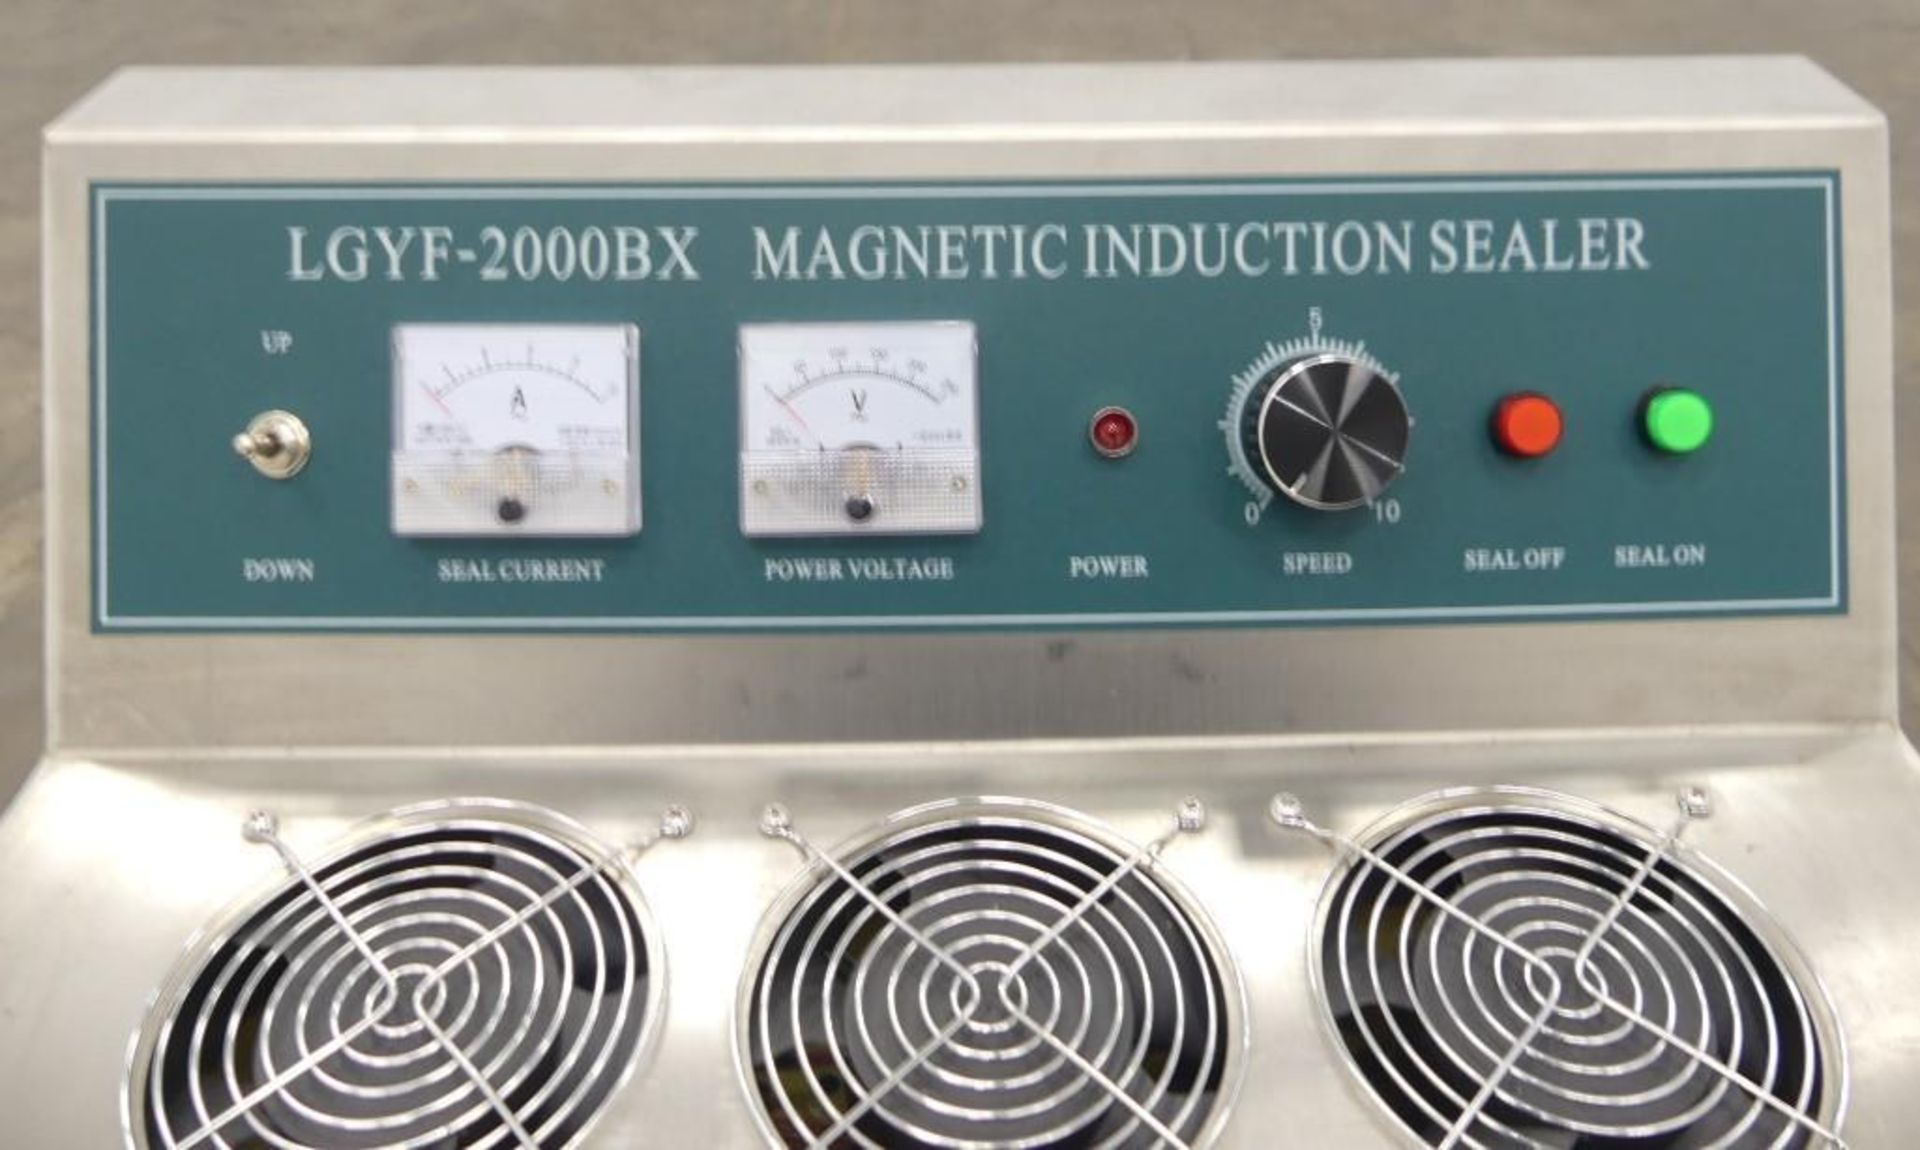 2021 LGYF-2000BX Stainless Steel Continuous Electromagnetic Induction Sealer - Image 11 of 16